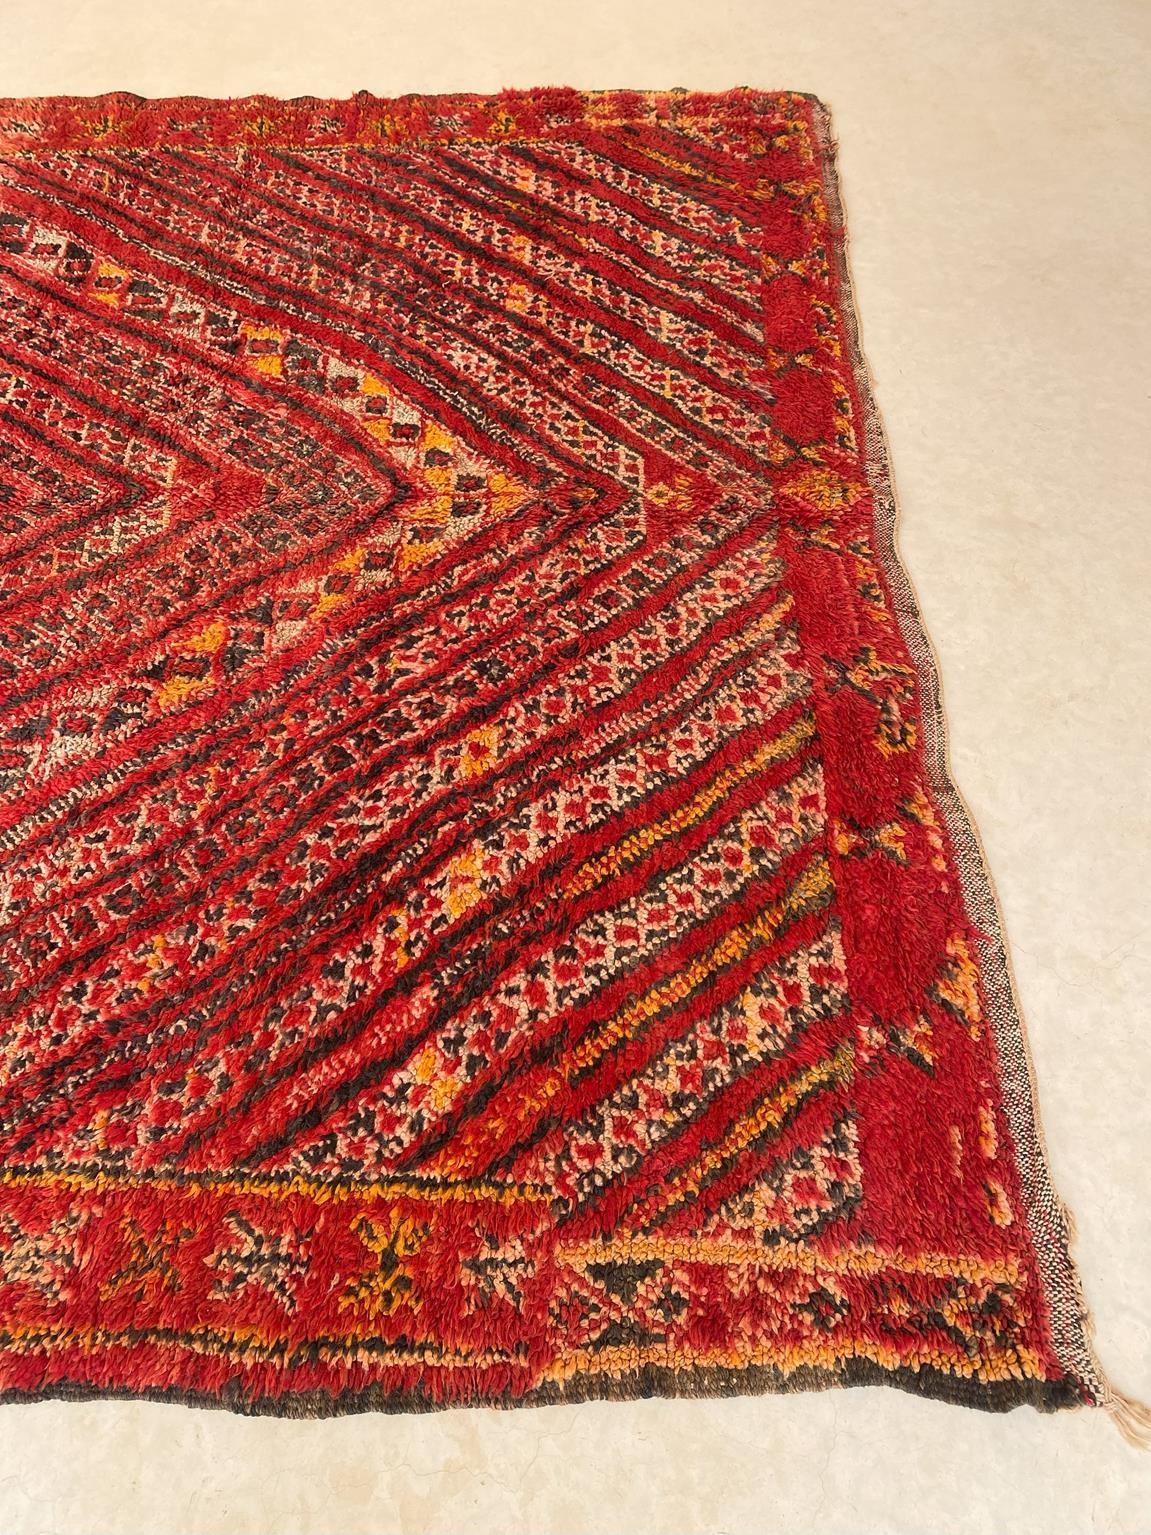 Vintage Moroccan Zayane rug - Red - 6.7x11.3feet / 205x344cm For Sale 1